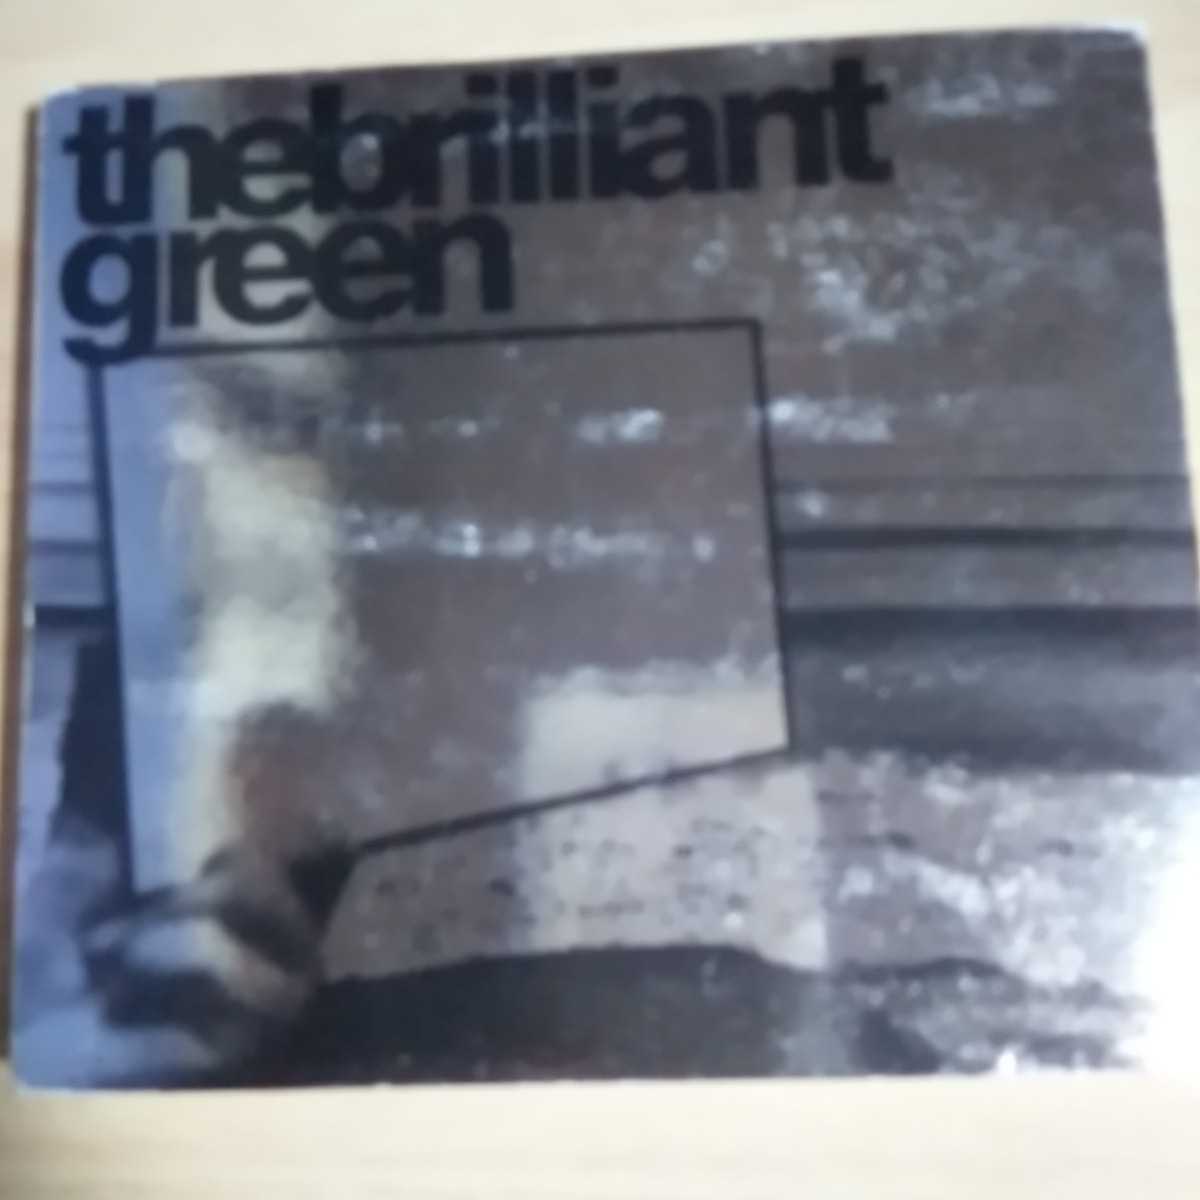 U042　CD　thebrilliant green　１．I’m In Heaven　２．冷たい花　３．You ＆ I　４．Always And Always　_画像1